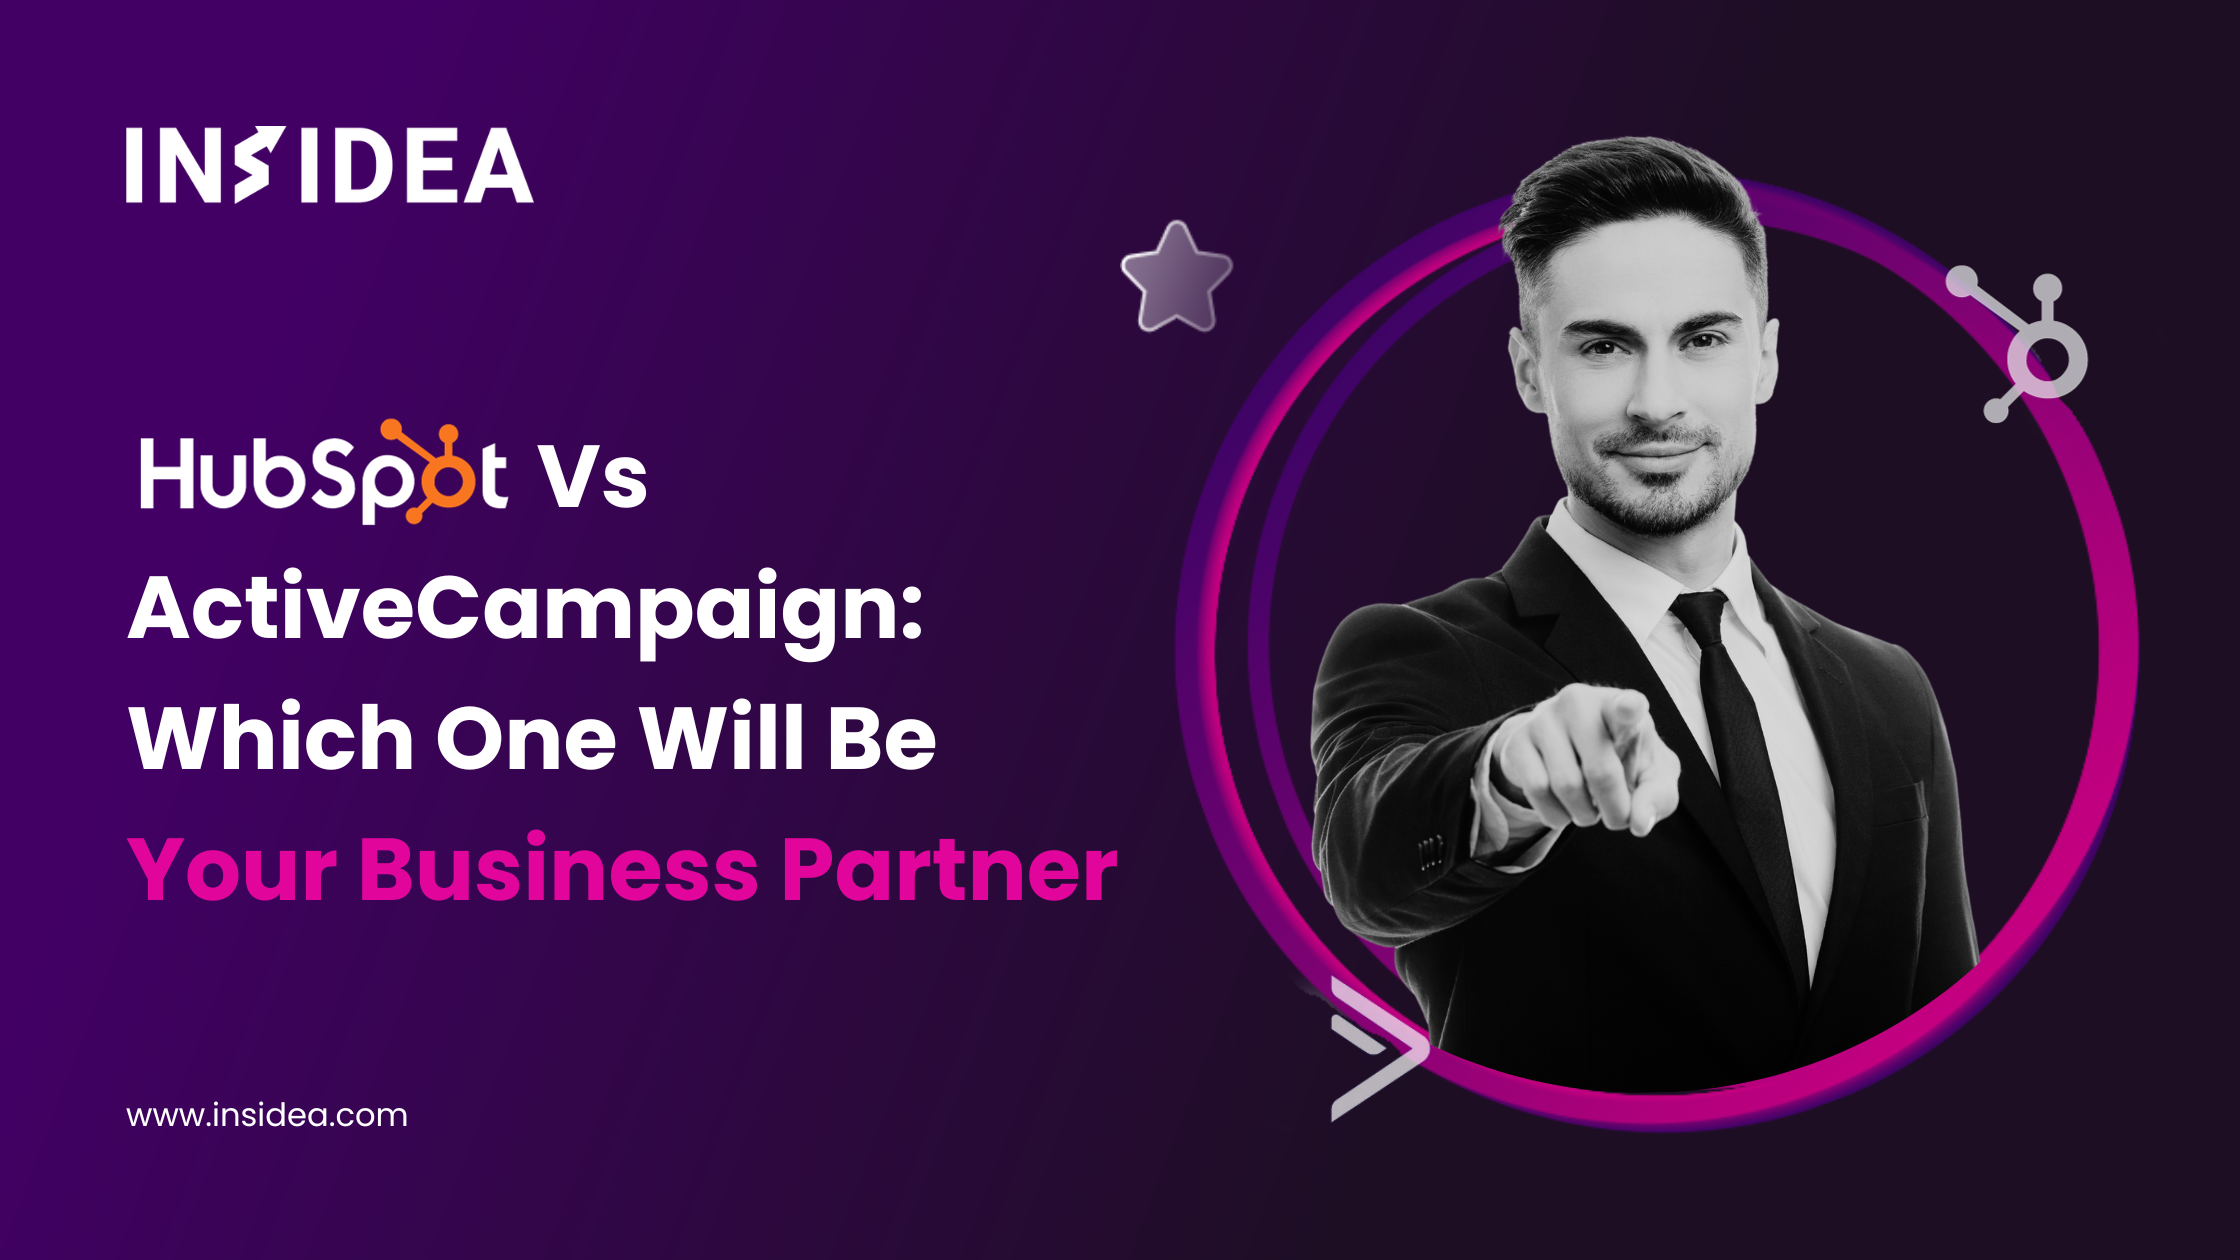 HubSpot Vs ActiveCampaign Which One Will Be Your Business Partner